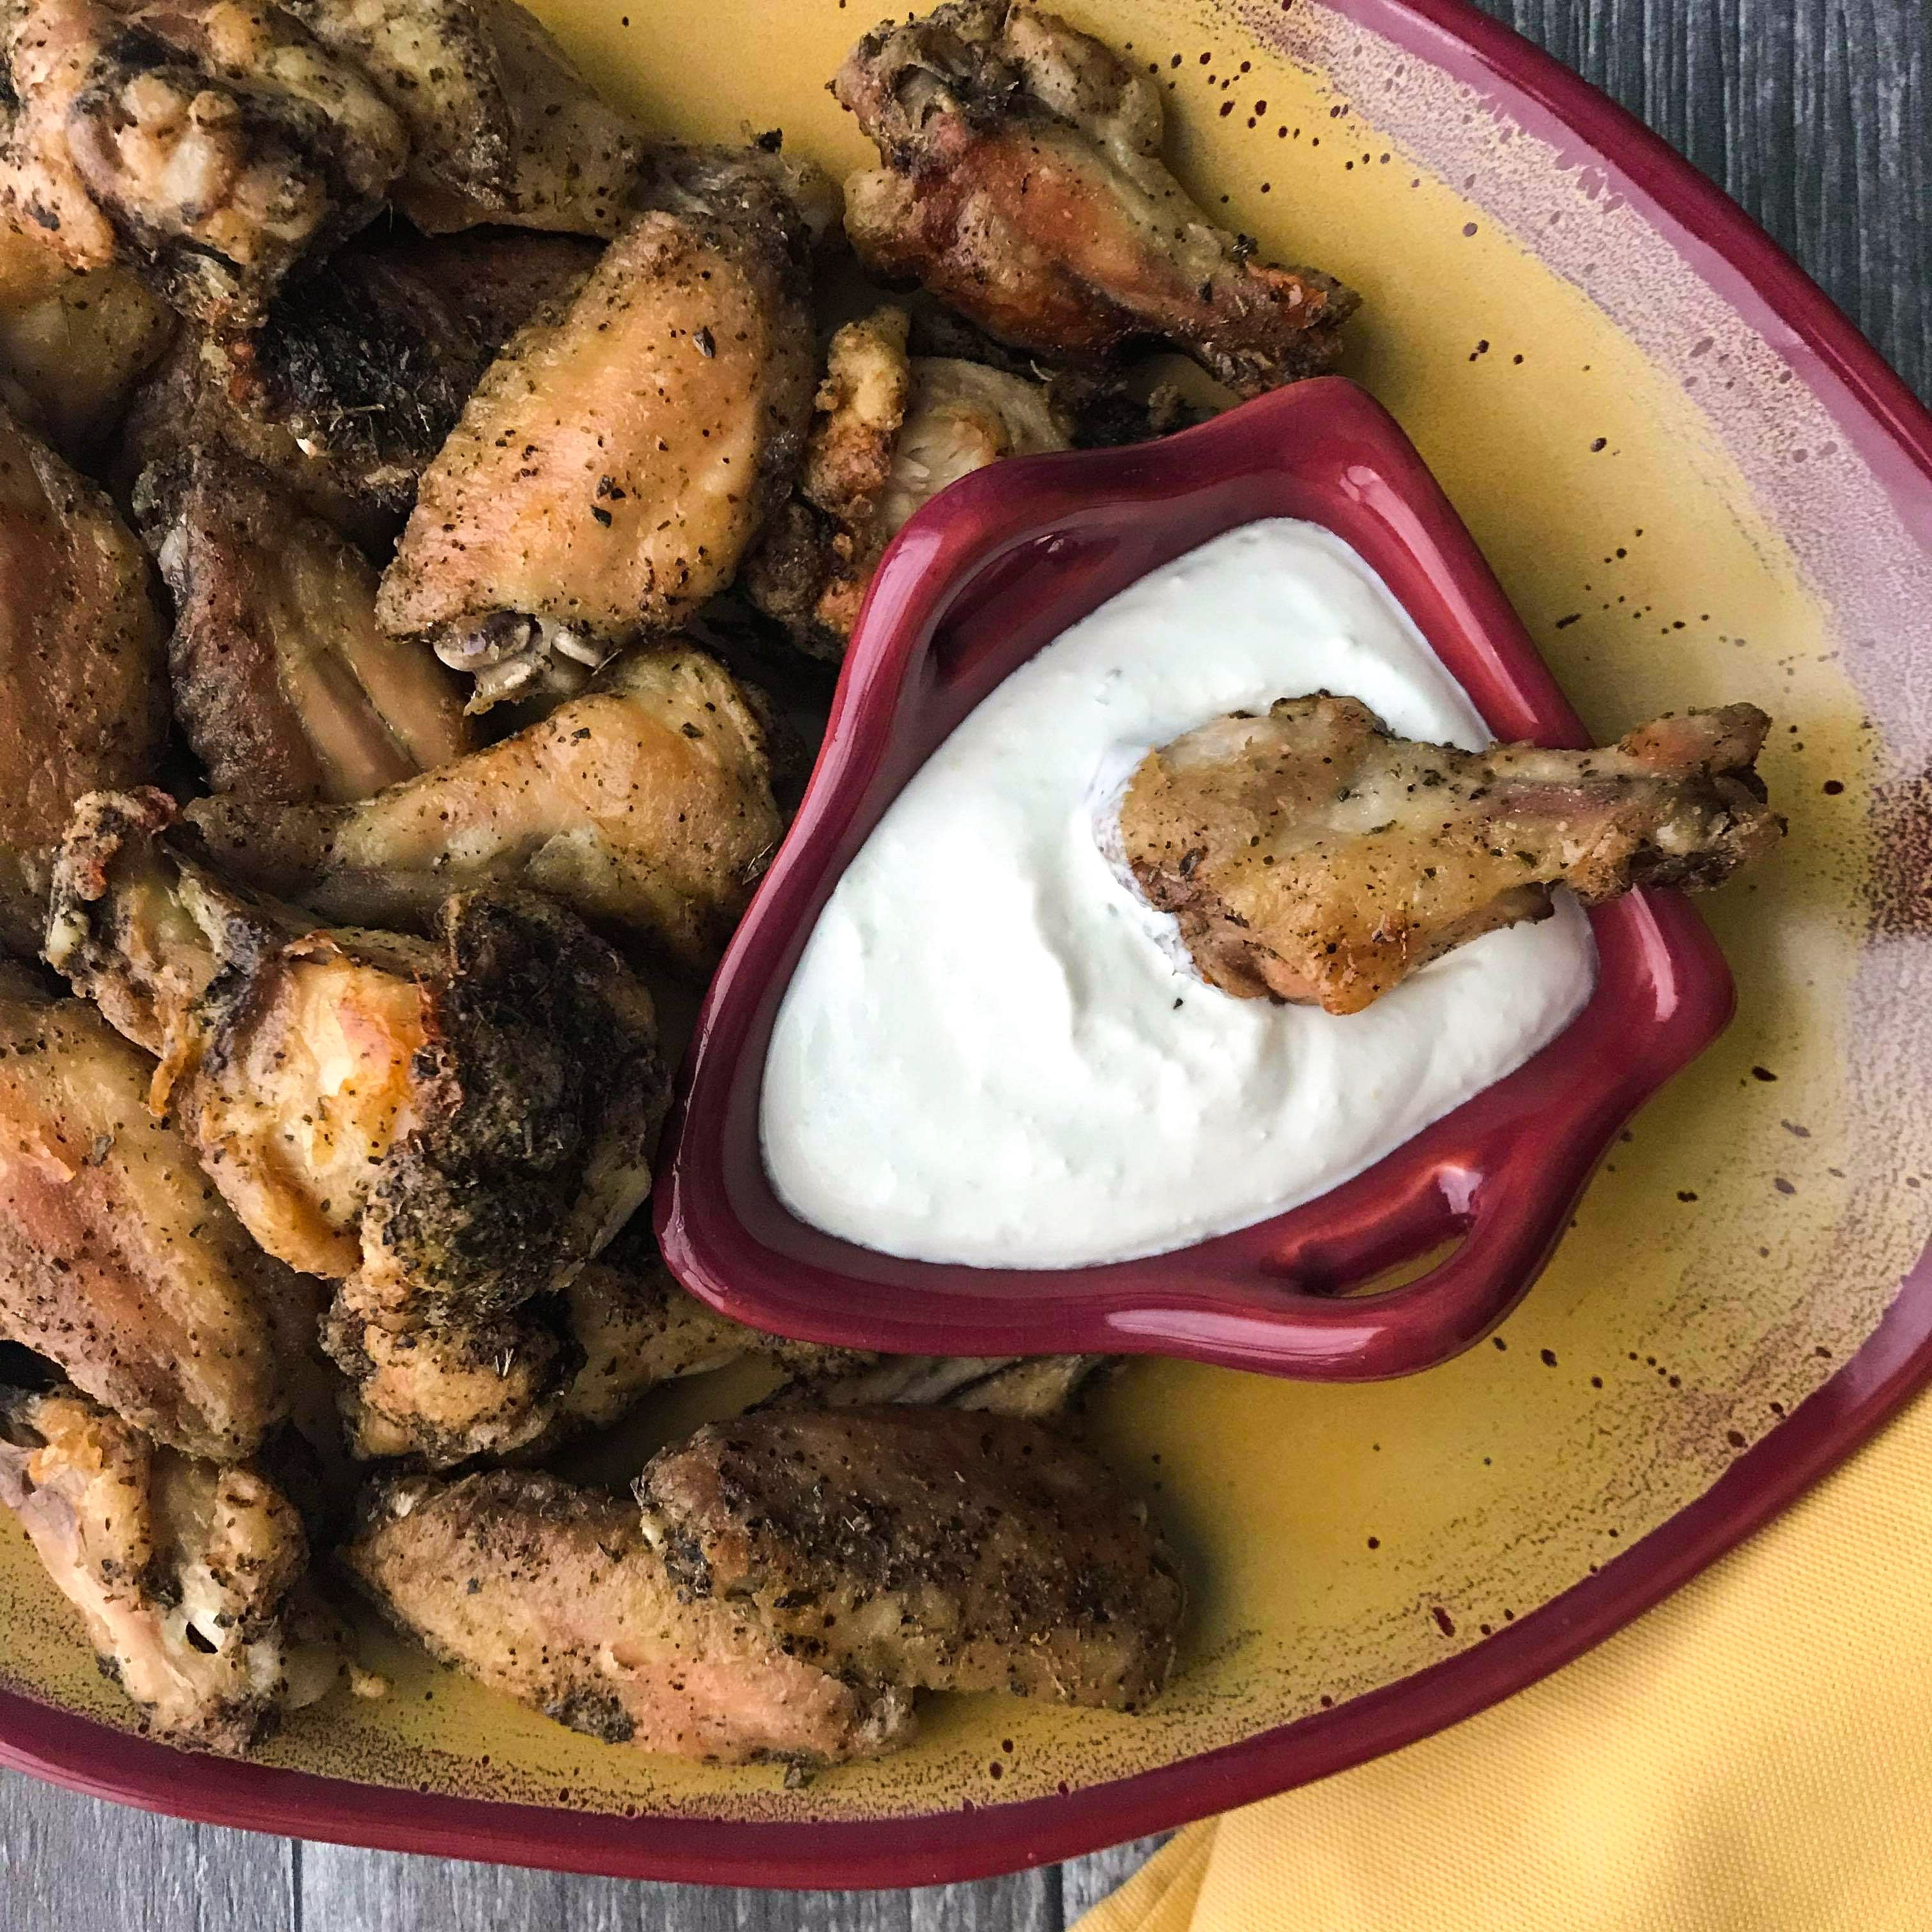 Chicken wings with a feta dipping sauce